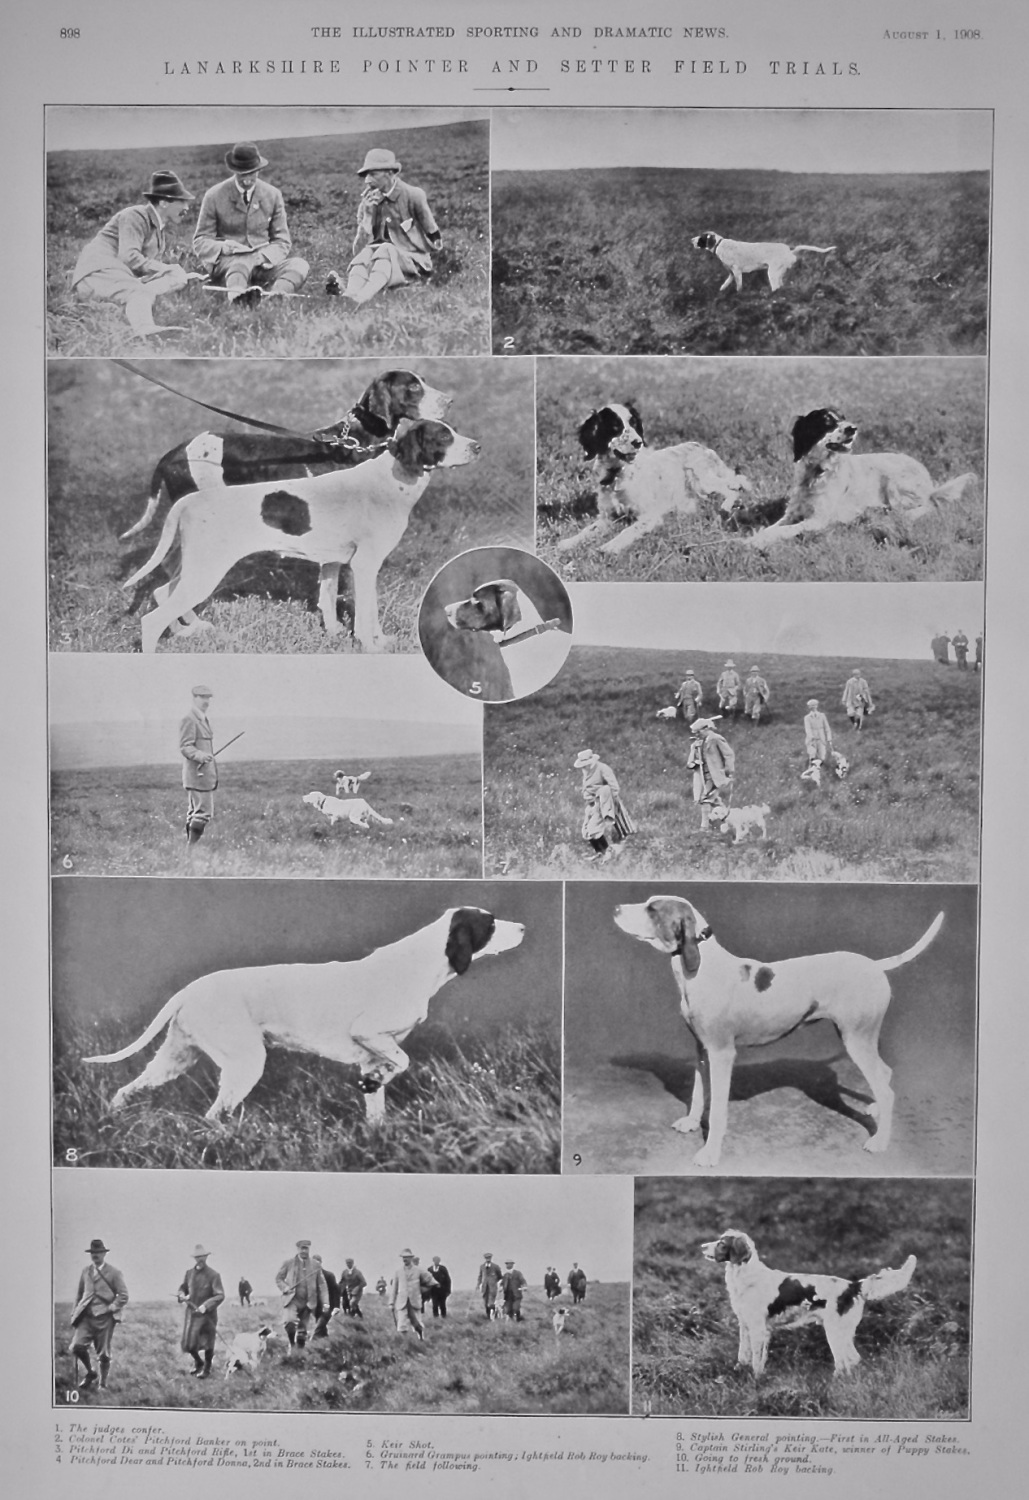 Lanarkshire Pointer and Setter Field Trials.  1908.